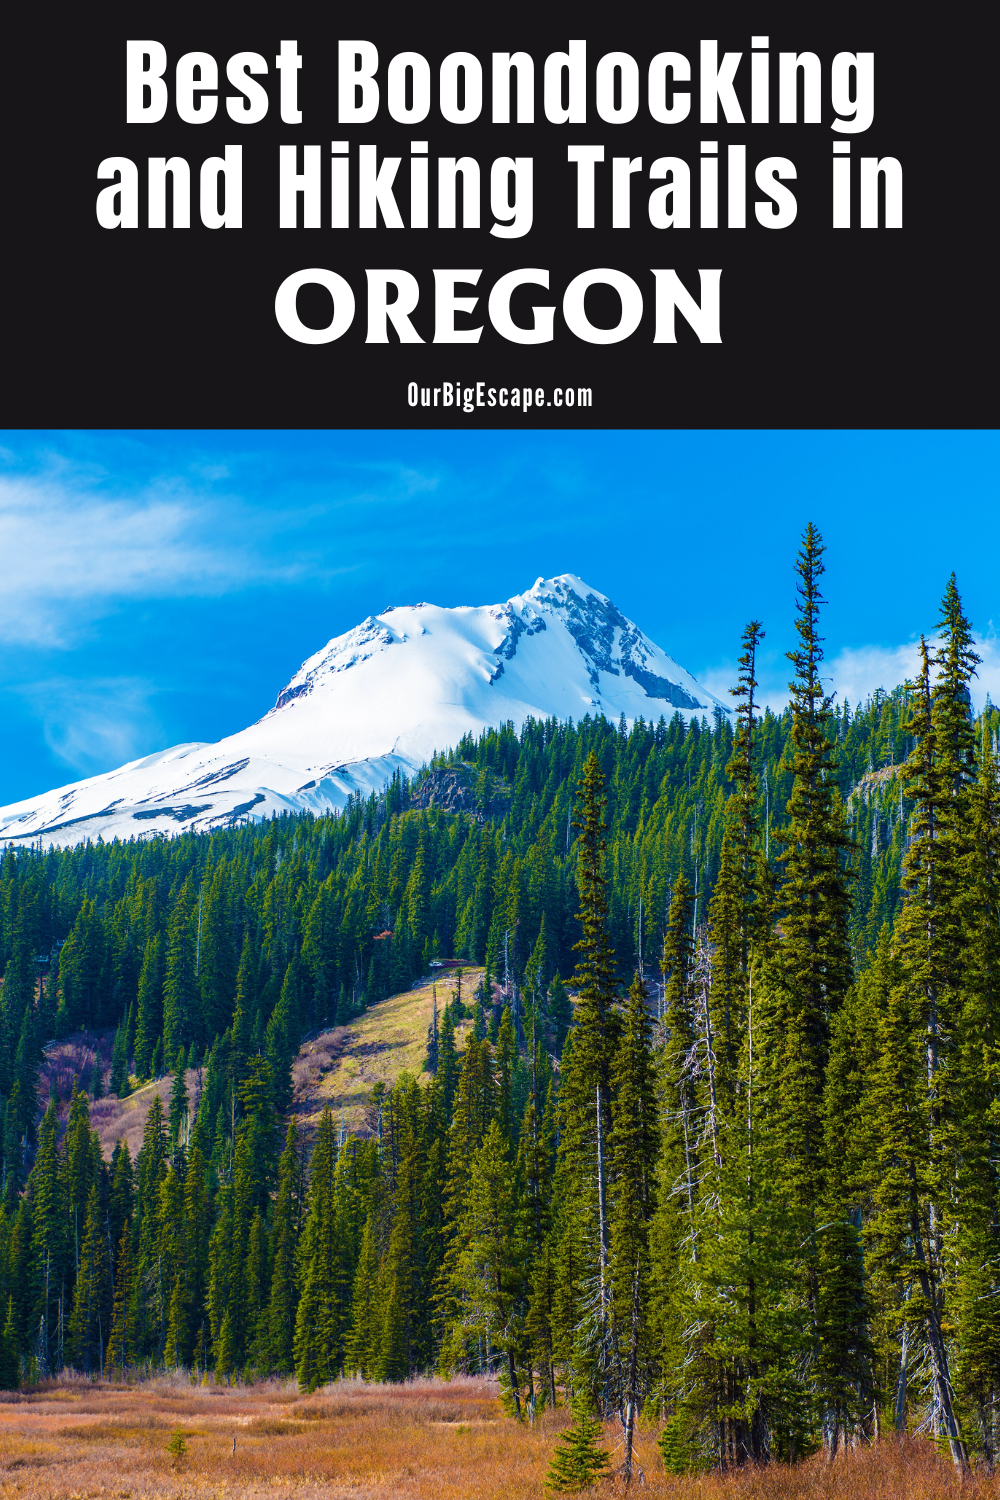 Best Boondocking and Hiking Trails in Oregon